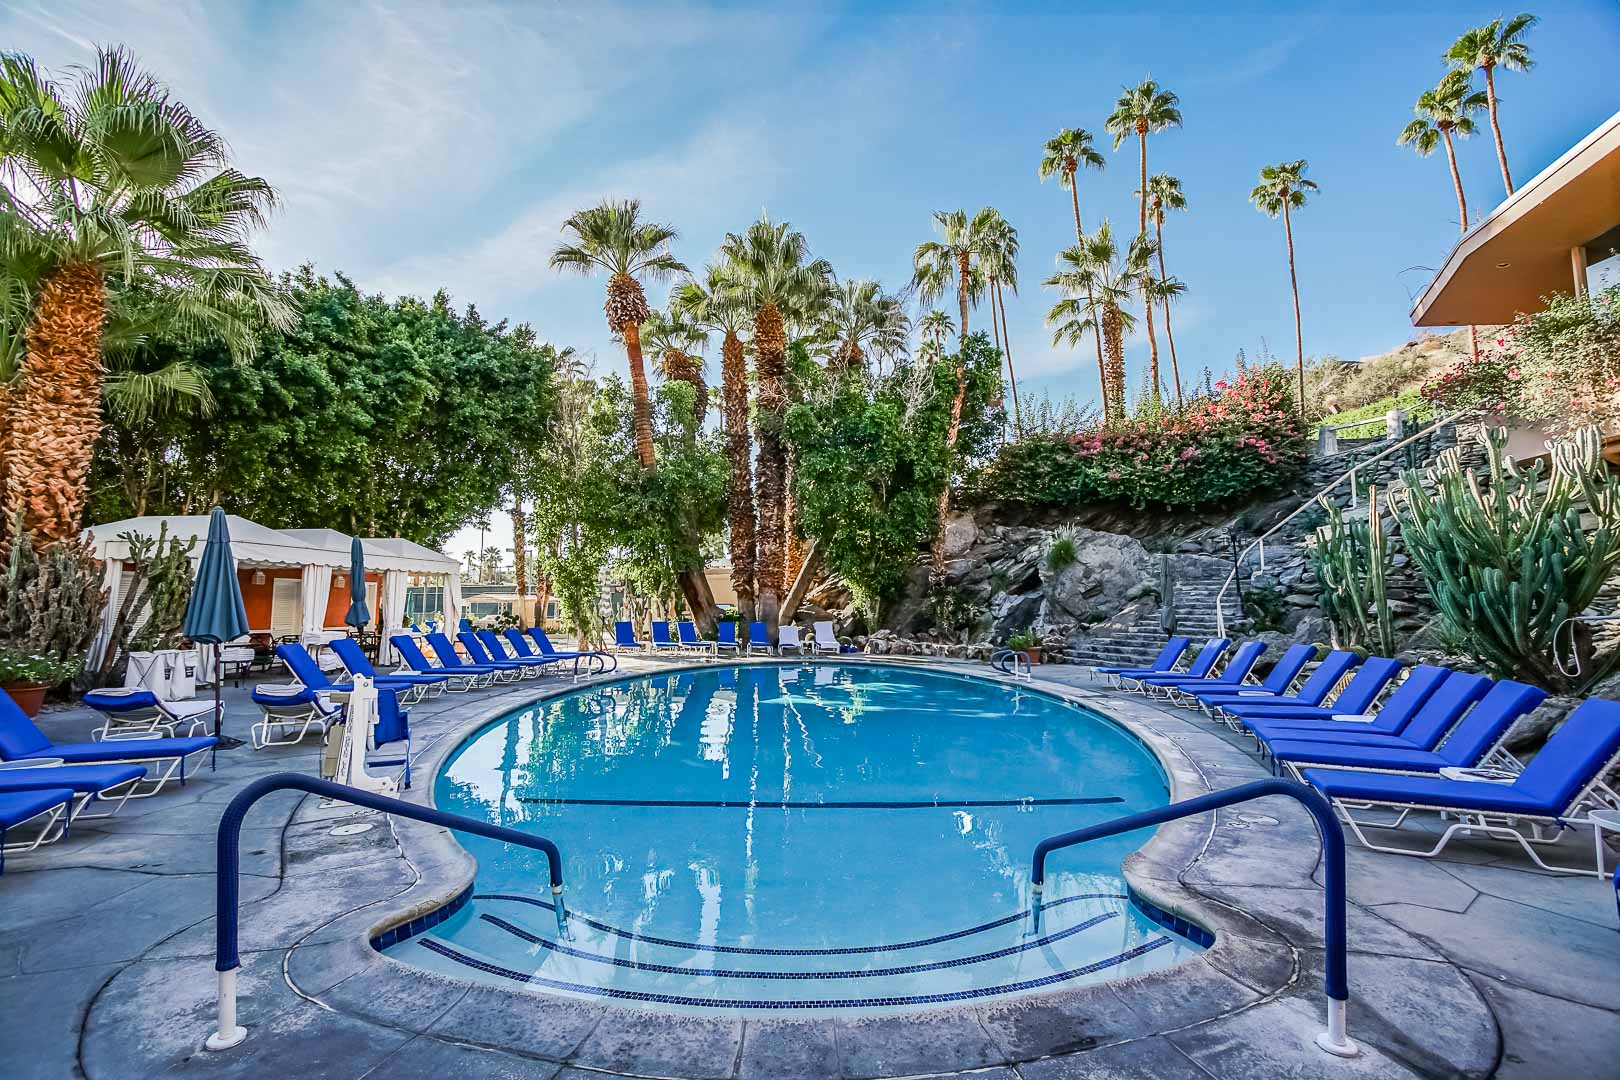 A peaceful view of the outdoor swimming pool at VRI's Palm Springs Tennis Club in California.